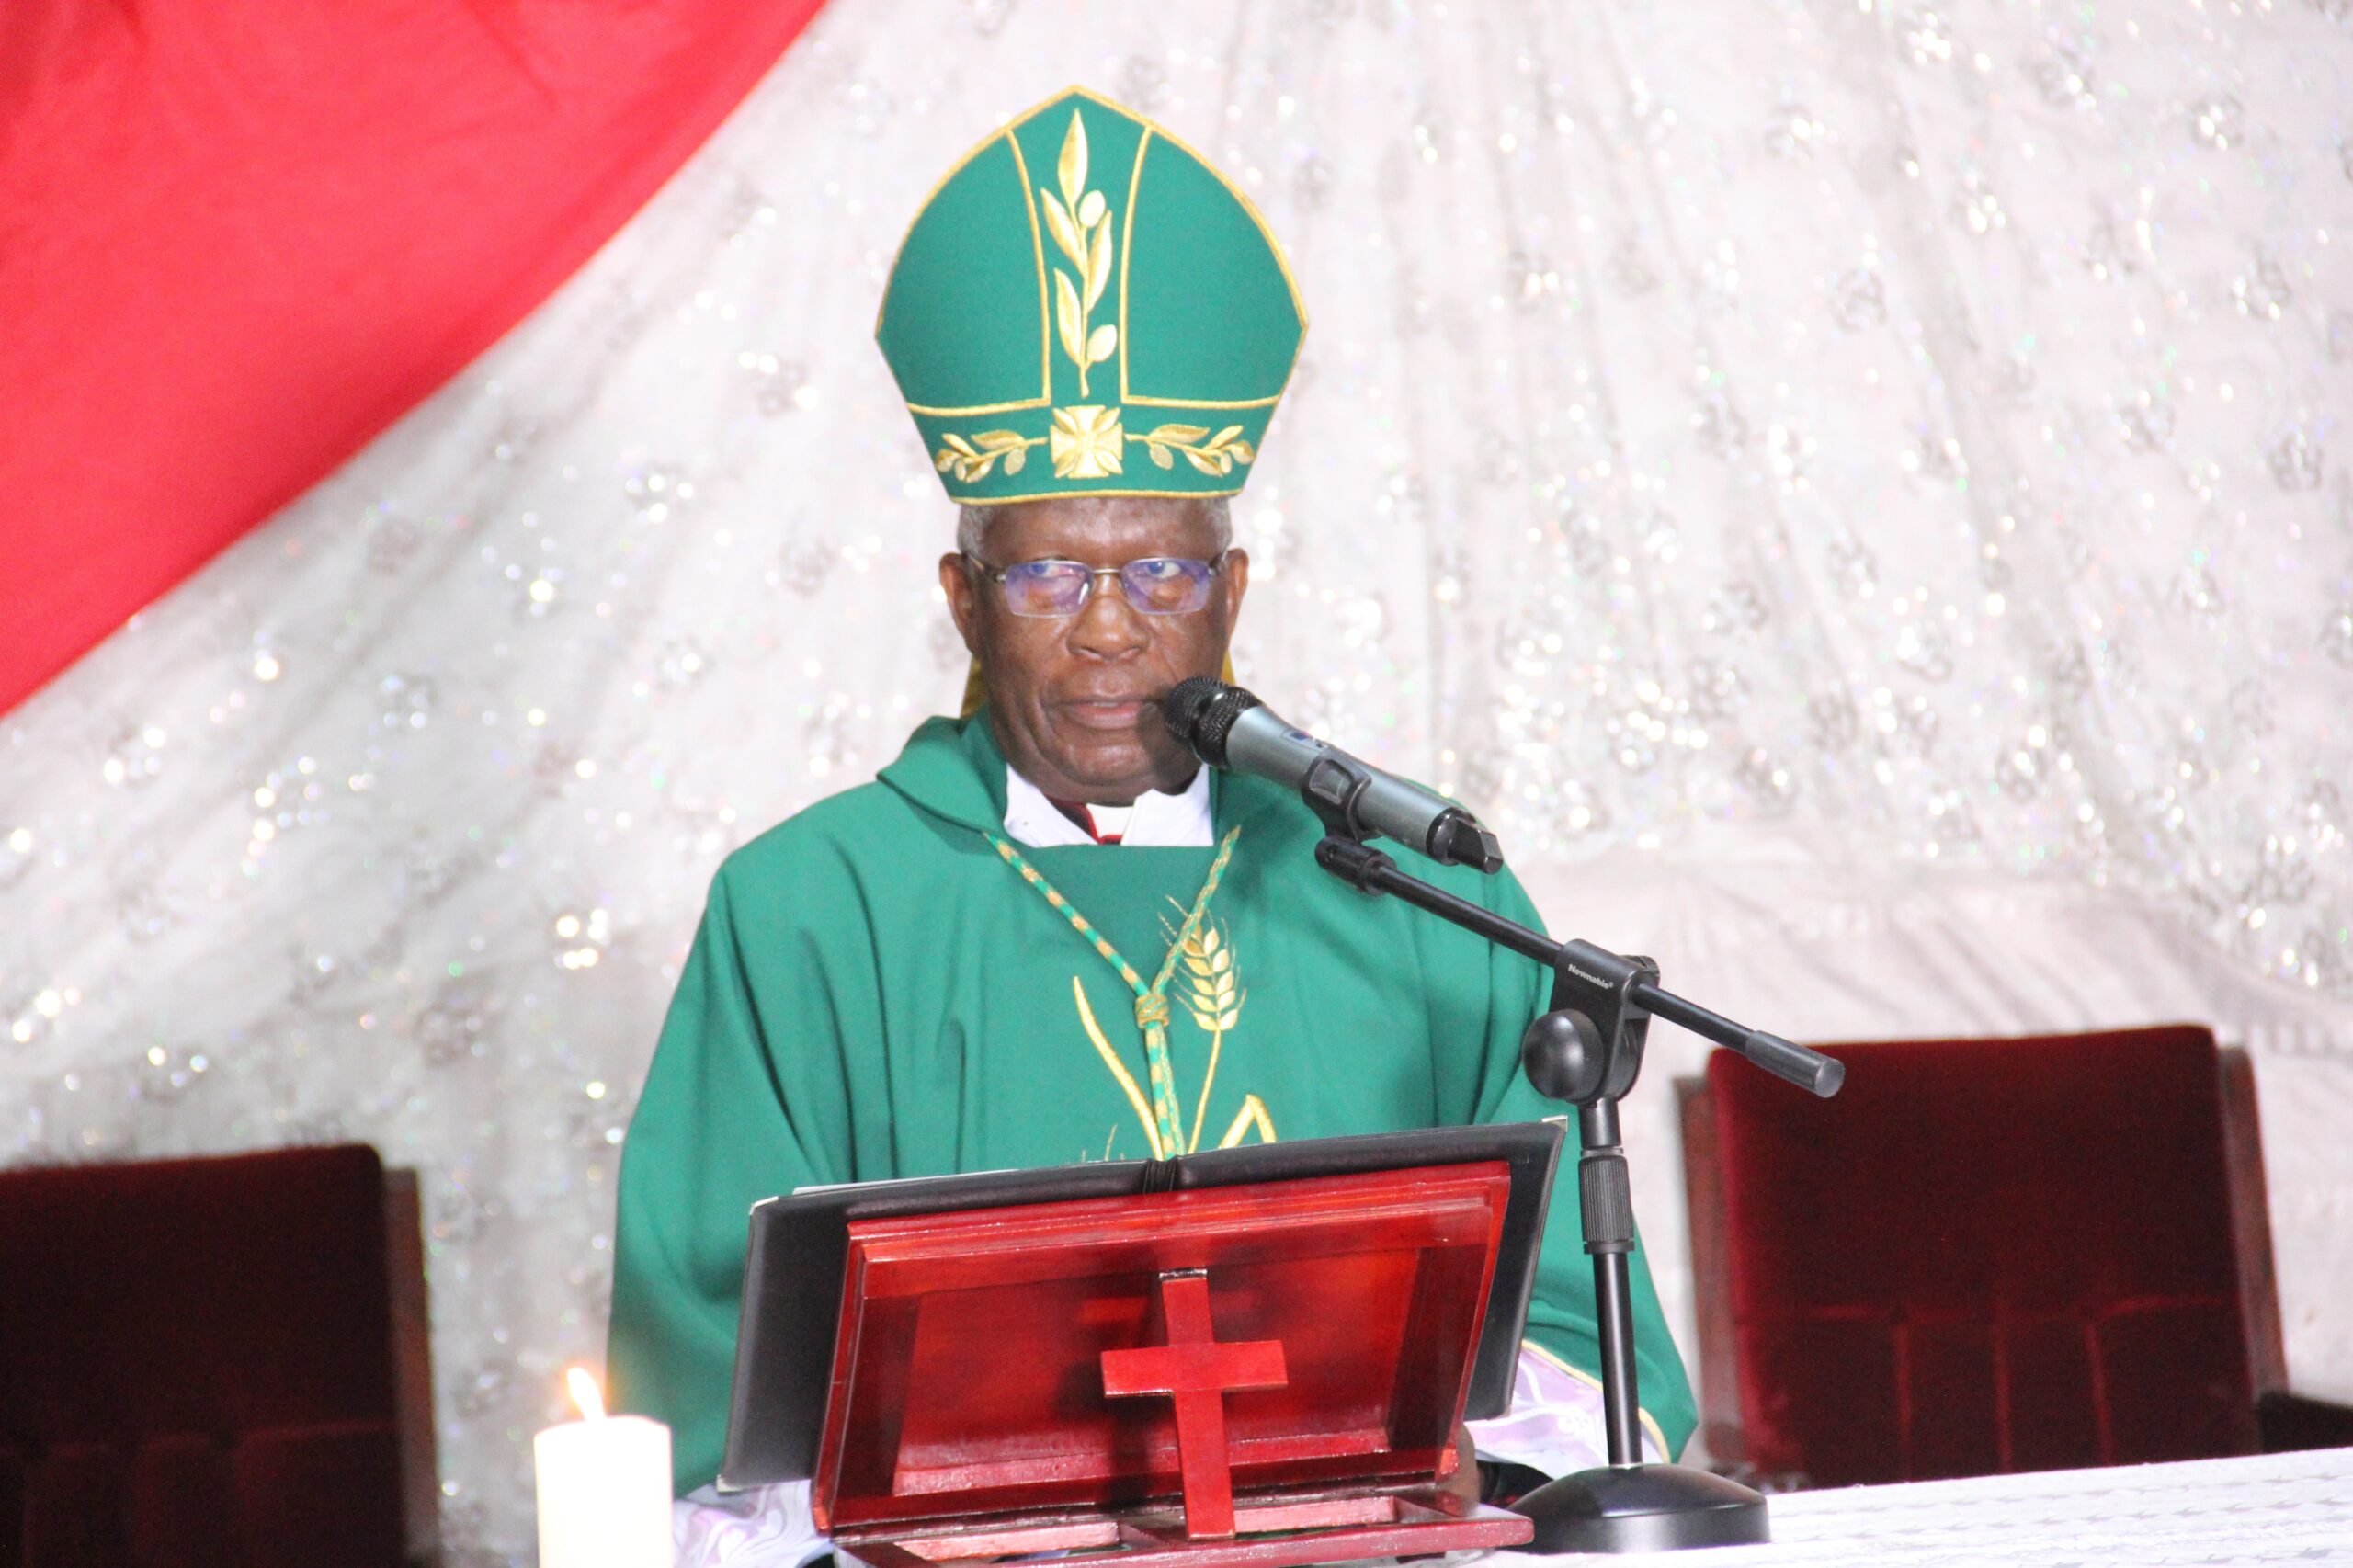 Catholic Church in Uganda Launches Preparations for the Synod on Synodality